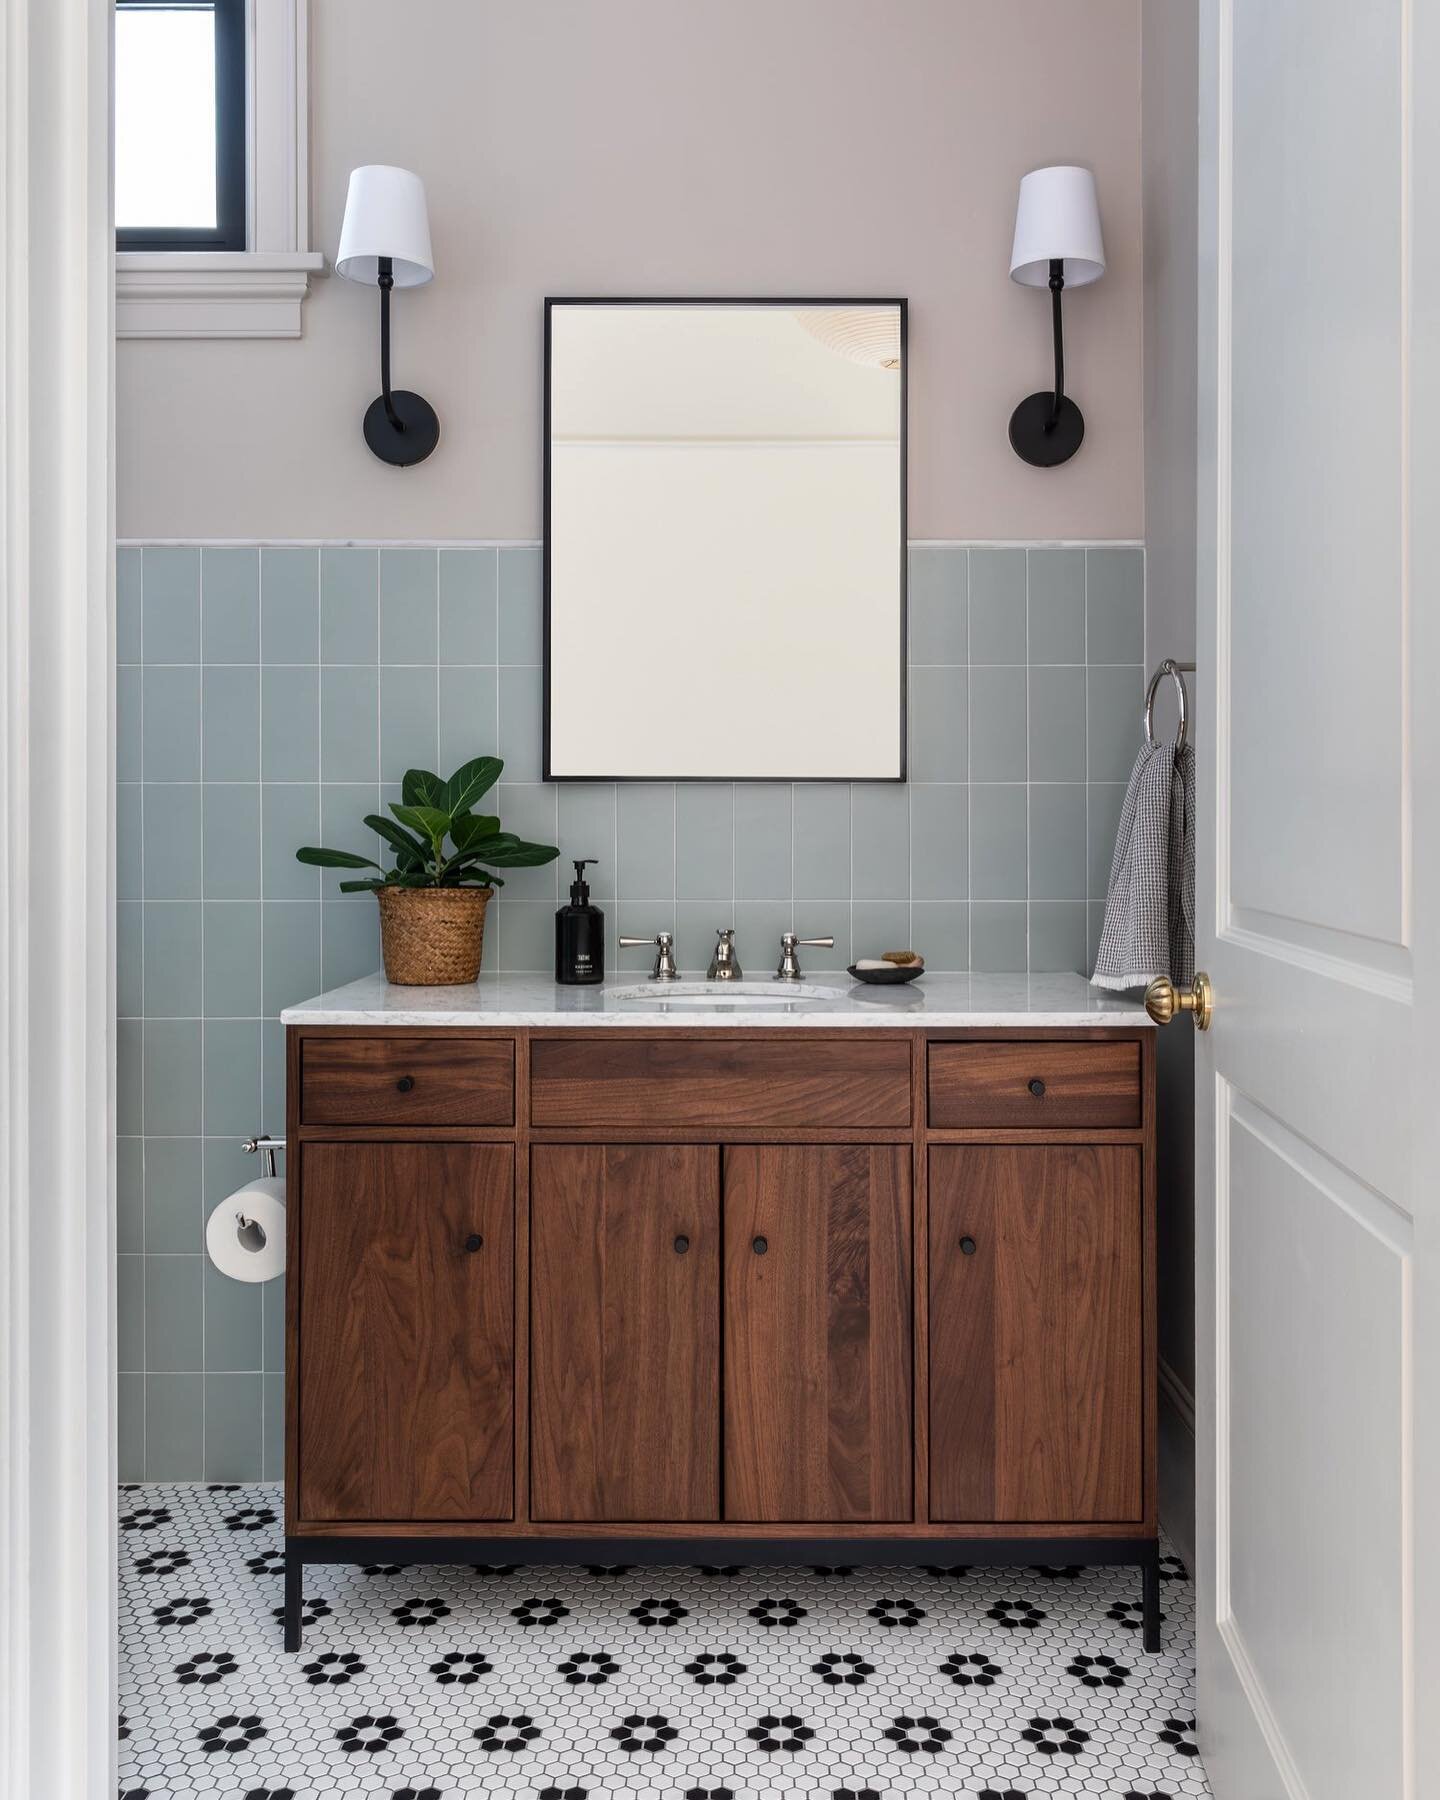 A sweet little bathroom break 🧻 from the Guest Bathroom at St Thomas Street. This bath is an excellent example of how a curated mix of materials &amp; finishes can enhance and customize the palette of a room. 

Interior Design: @cattaneostudios 
Pho